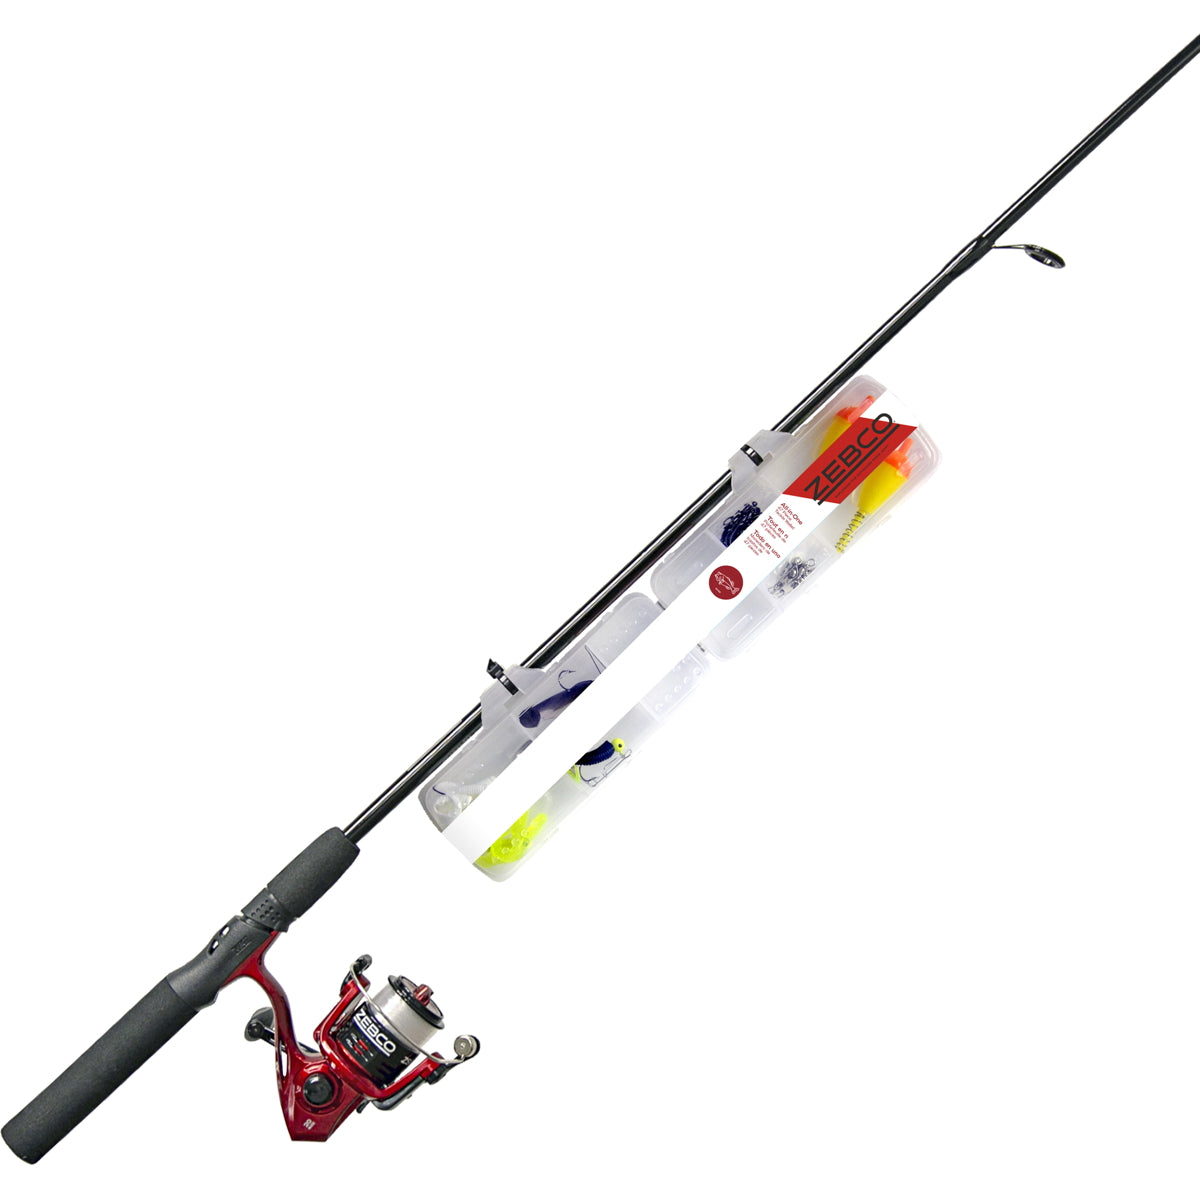 Photo of Zebco ZSP/20602ML Spin Combo with 56-Piece Tackle Kit for sale at United Tackle Shops.